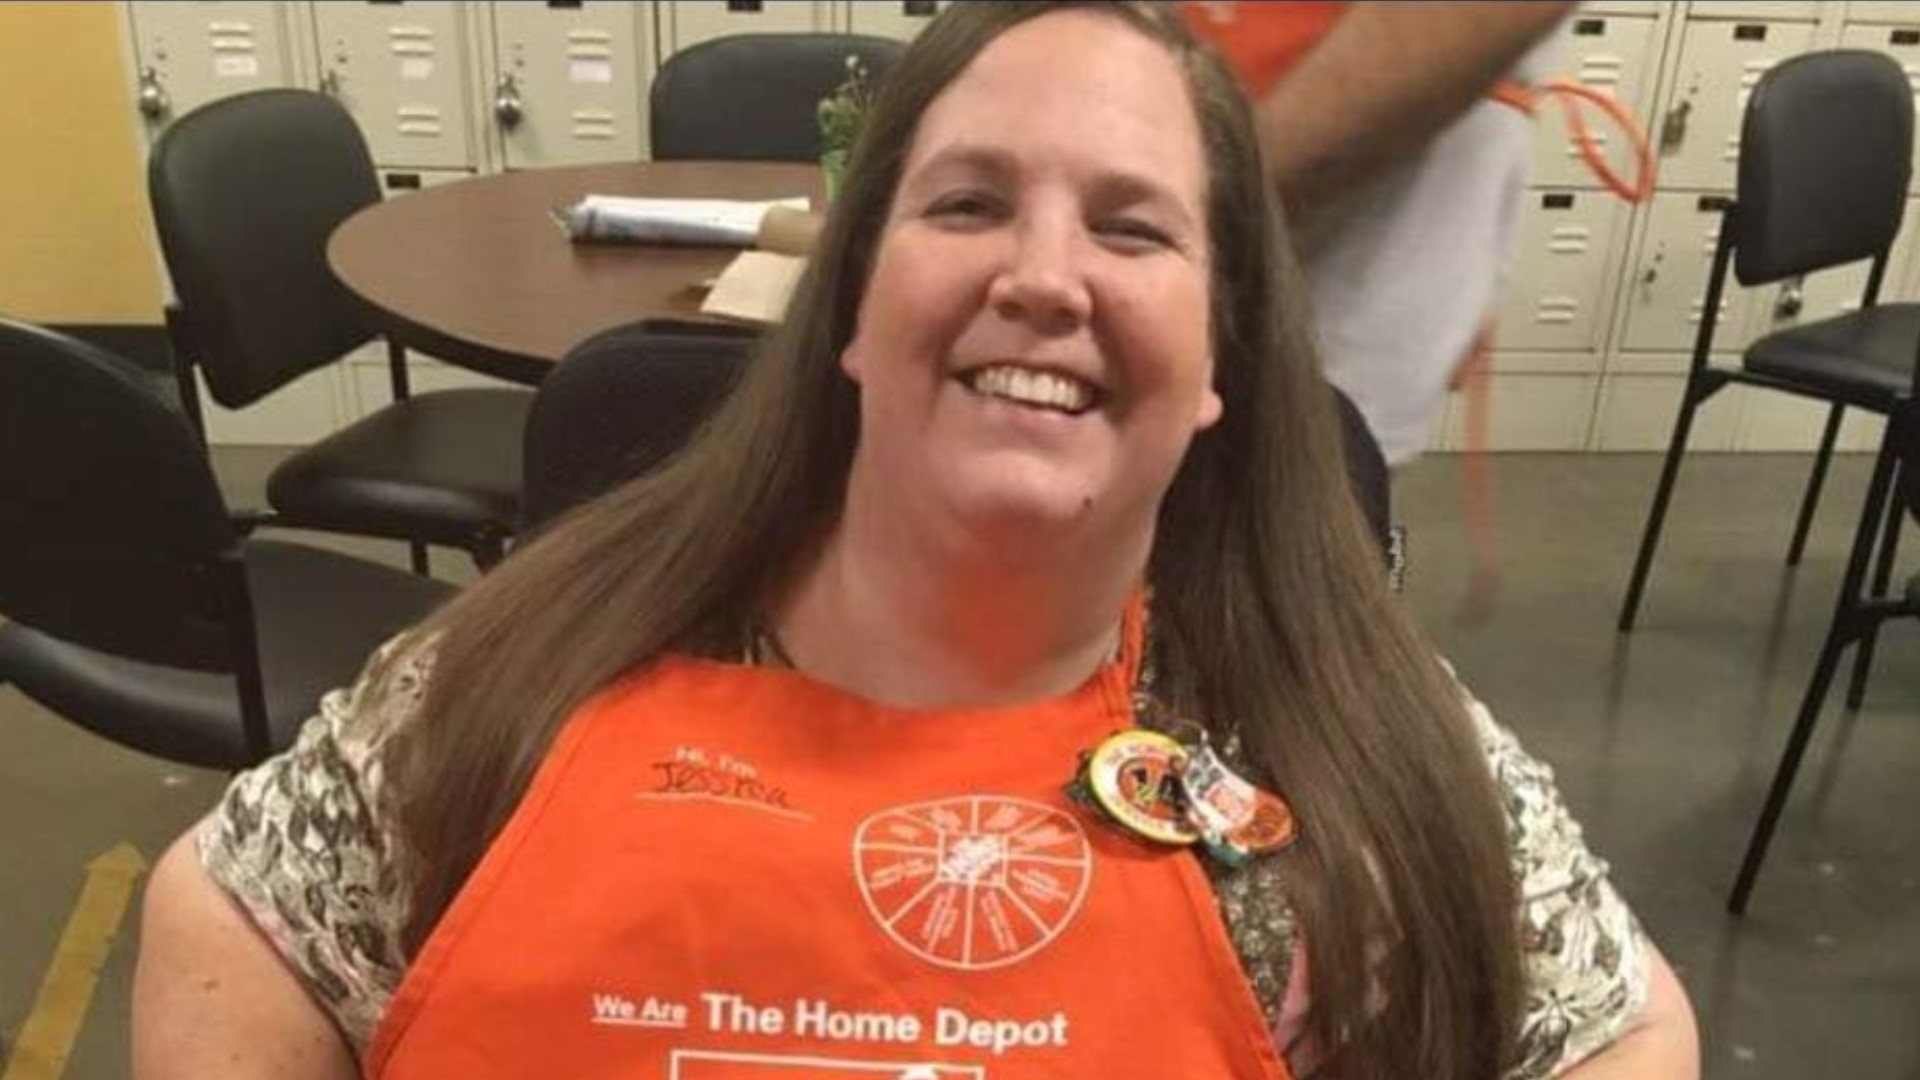 A longtime employee of a Home Depot in Roseville has been offered her job back after accusations she was unfairly fired because of her disability.